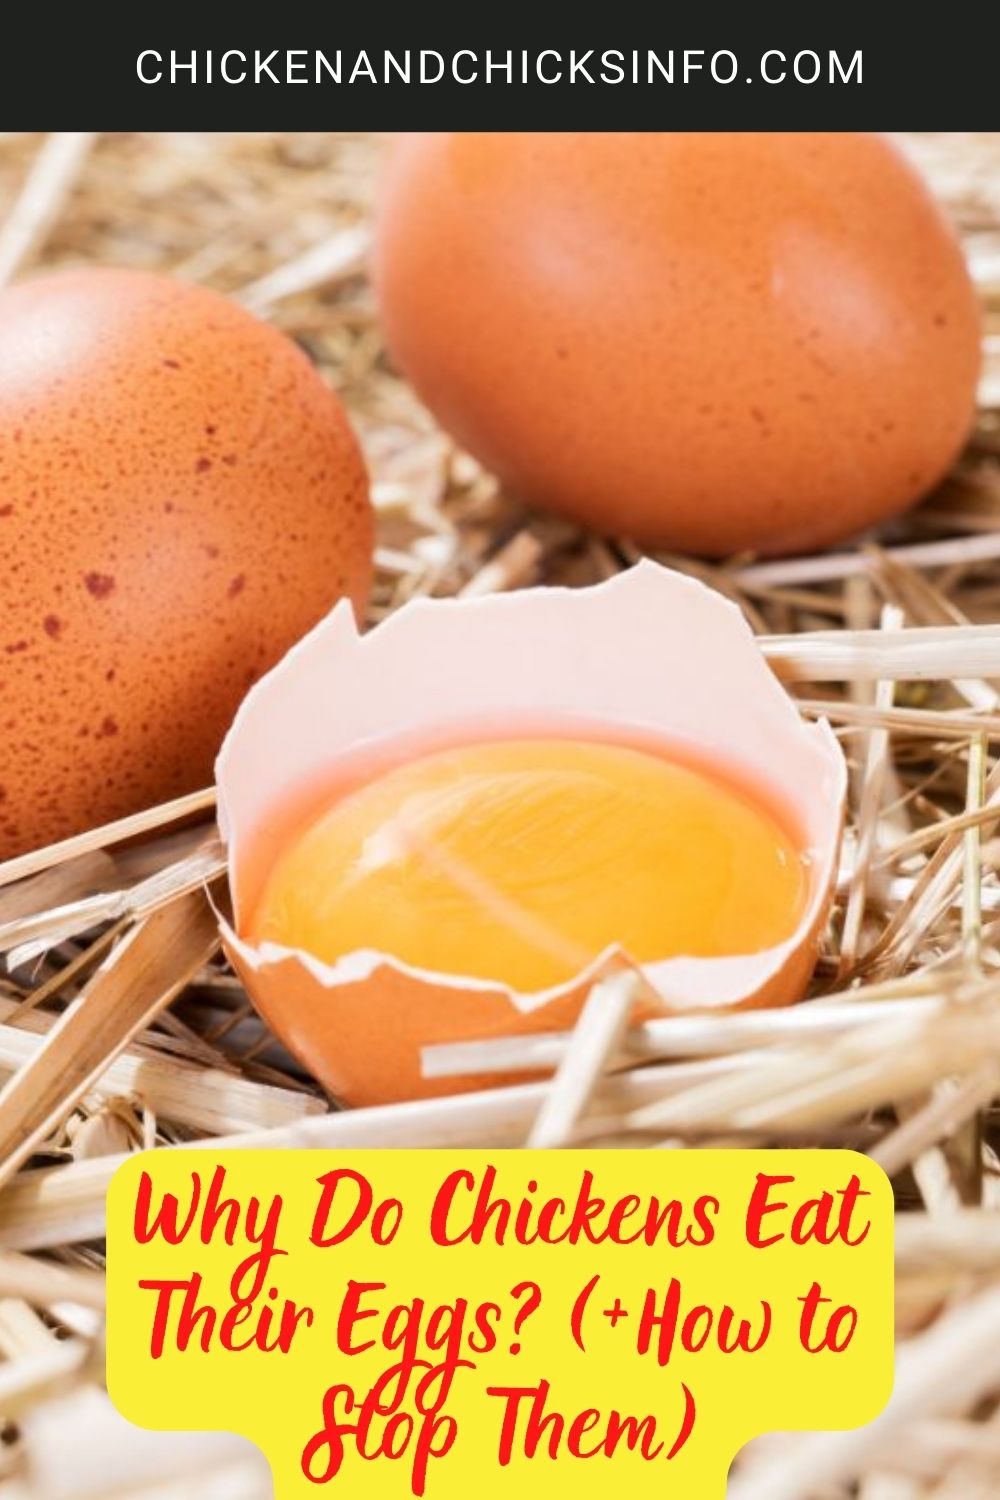 Why Do Chickens Eat Their Eggs? (+How to Stop Them) poster.
